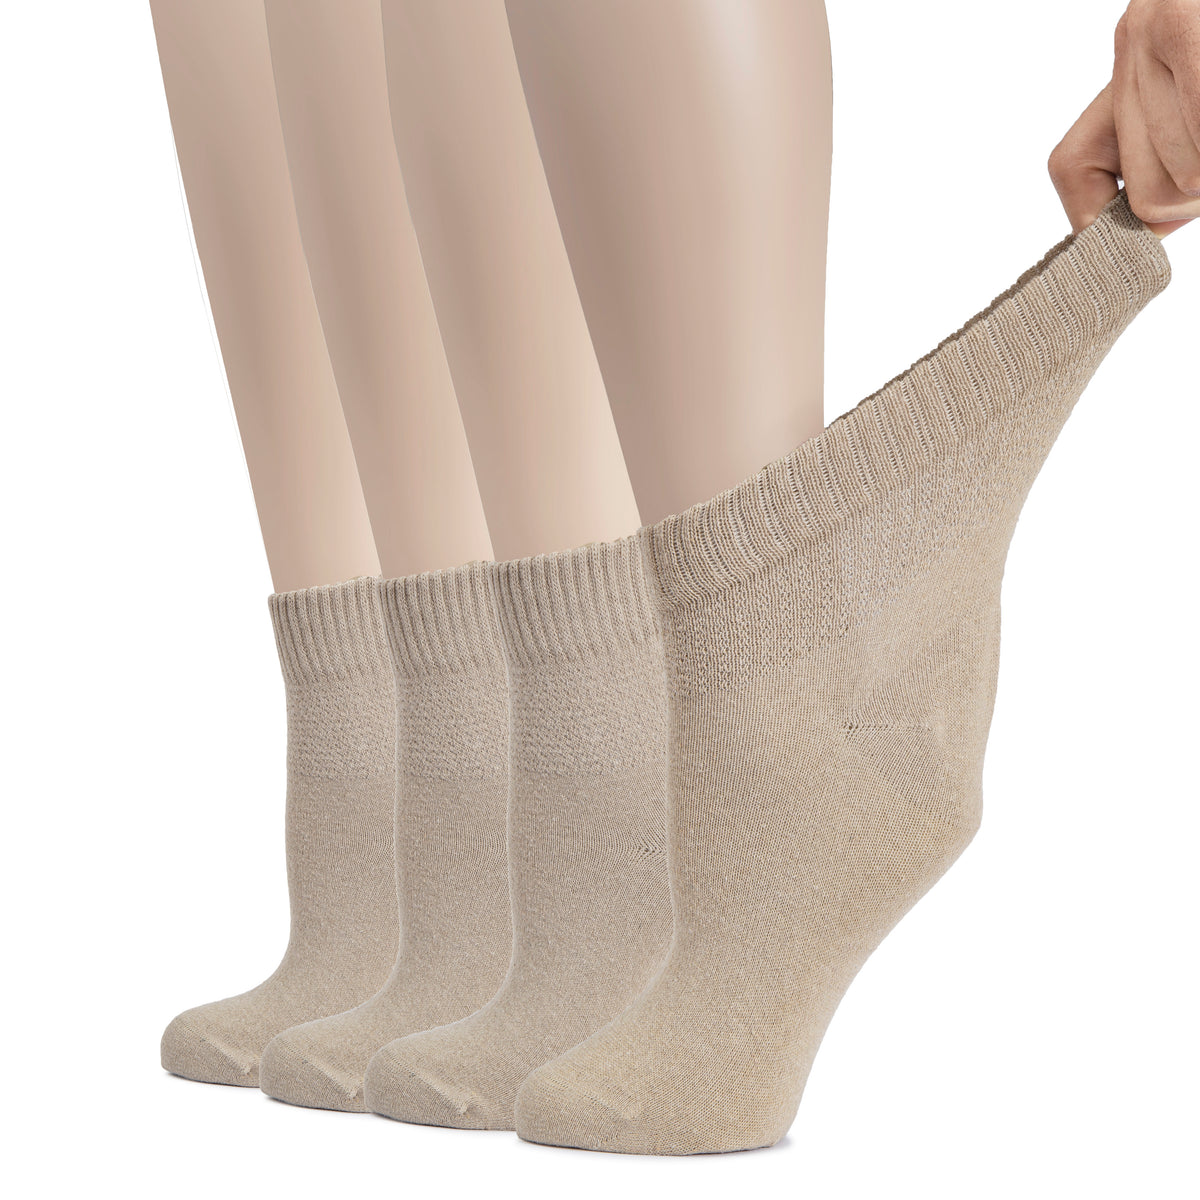 Hugh Ugoli Cotton Diabetic Women's Socks, Ankle Height, Loose, Wide Stretchy, Thin, Seamless Toe and Non-Binding Top, 4 Pairs | Shoe Size: 10-12 | Melange Grey